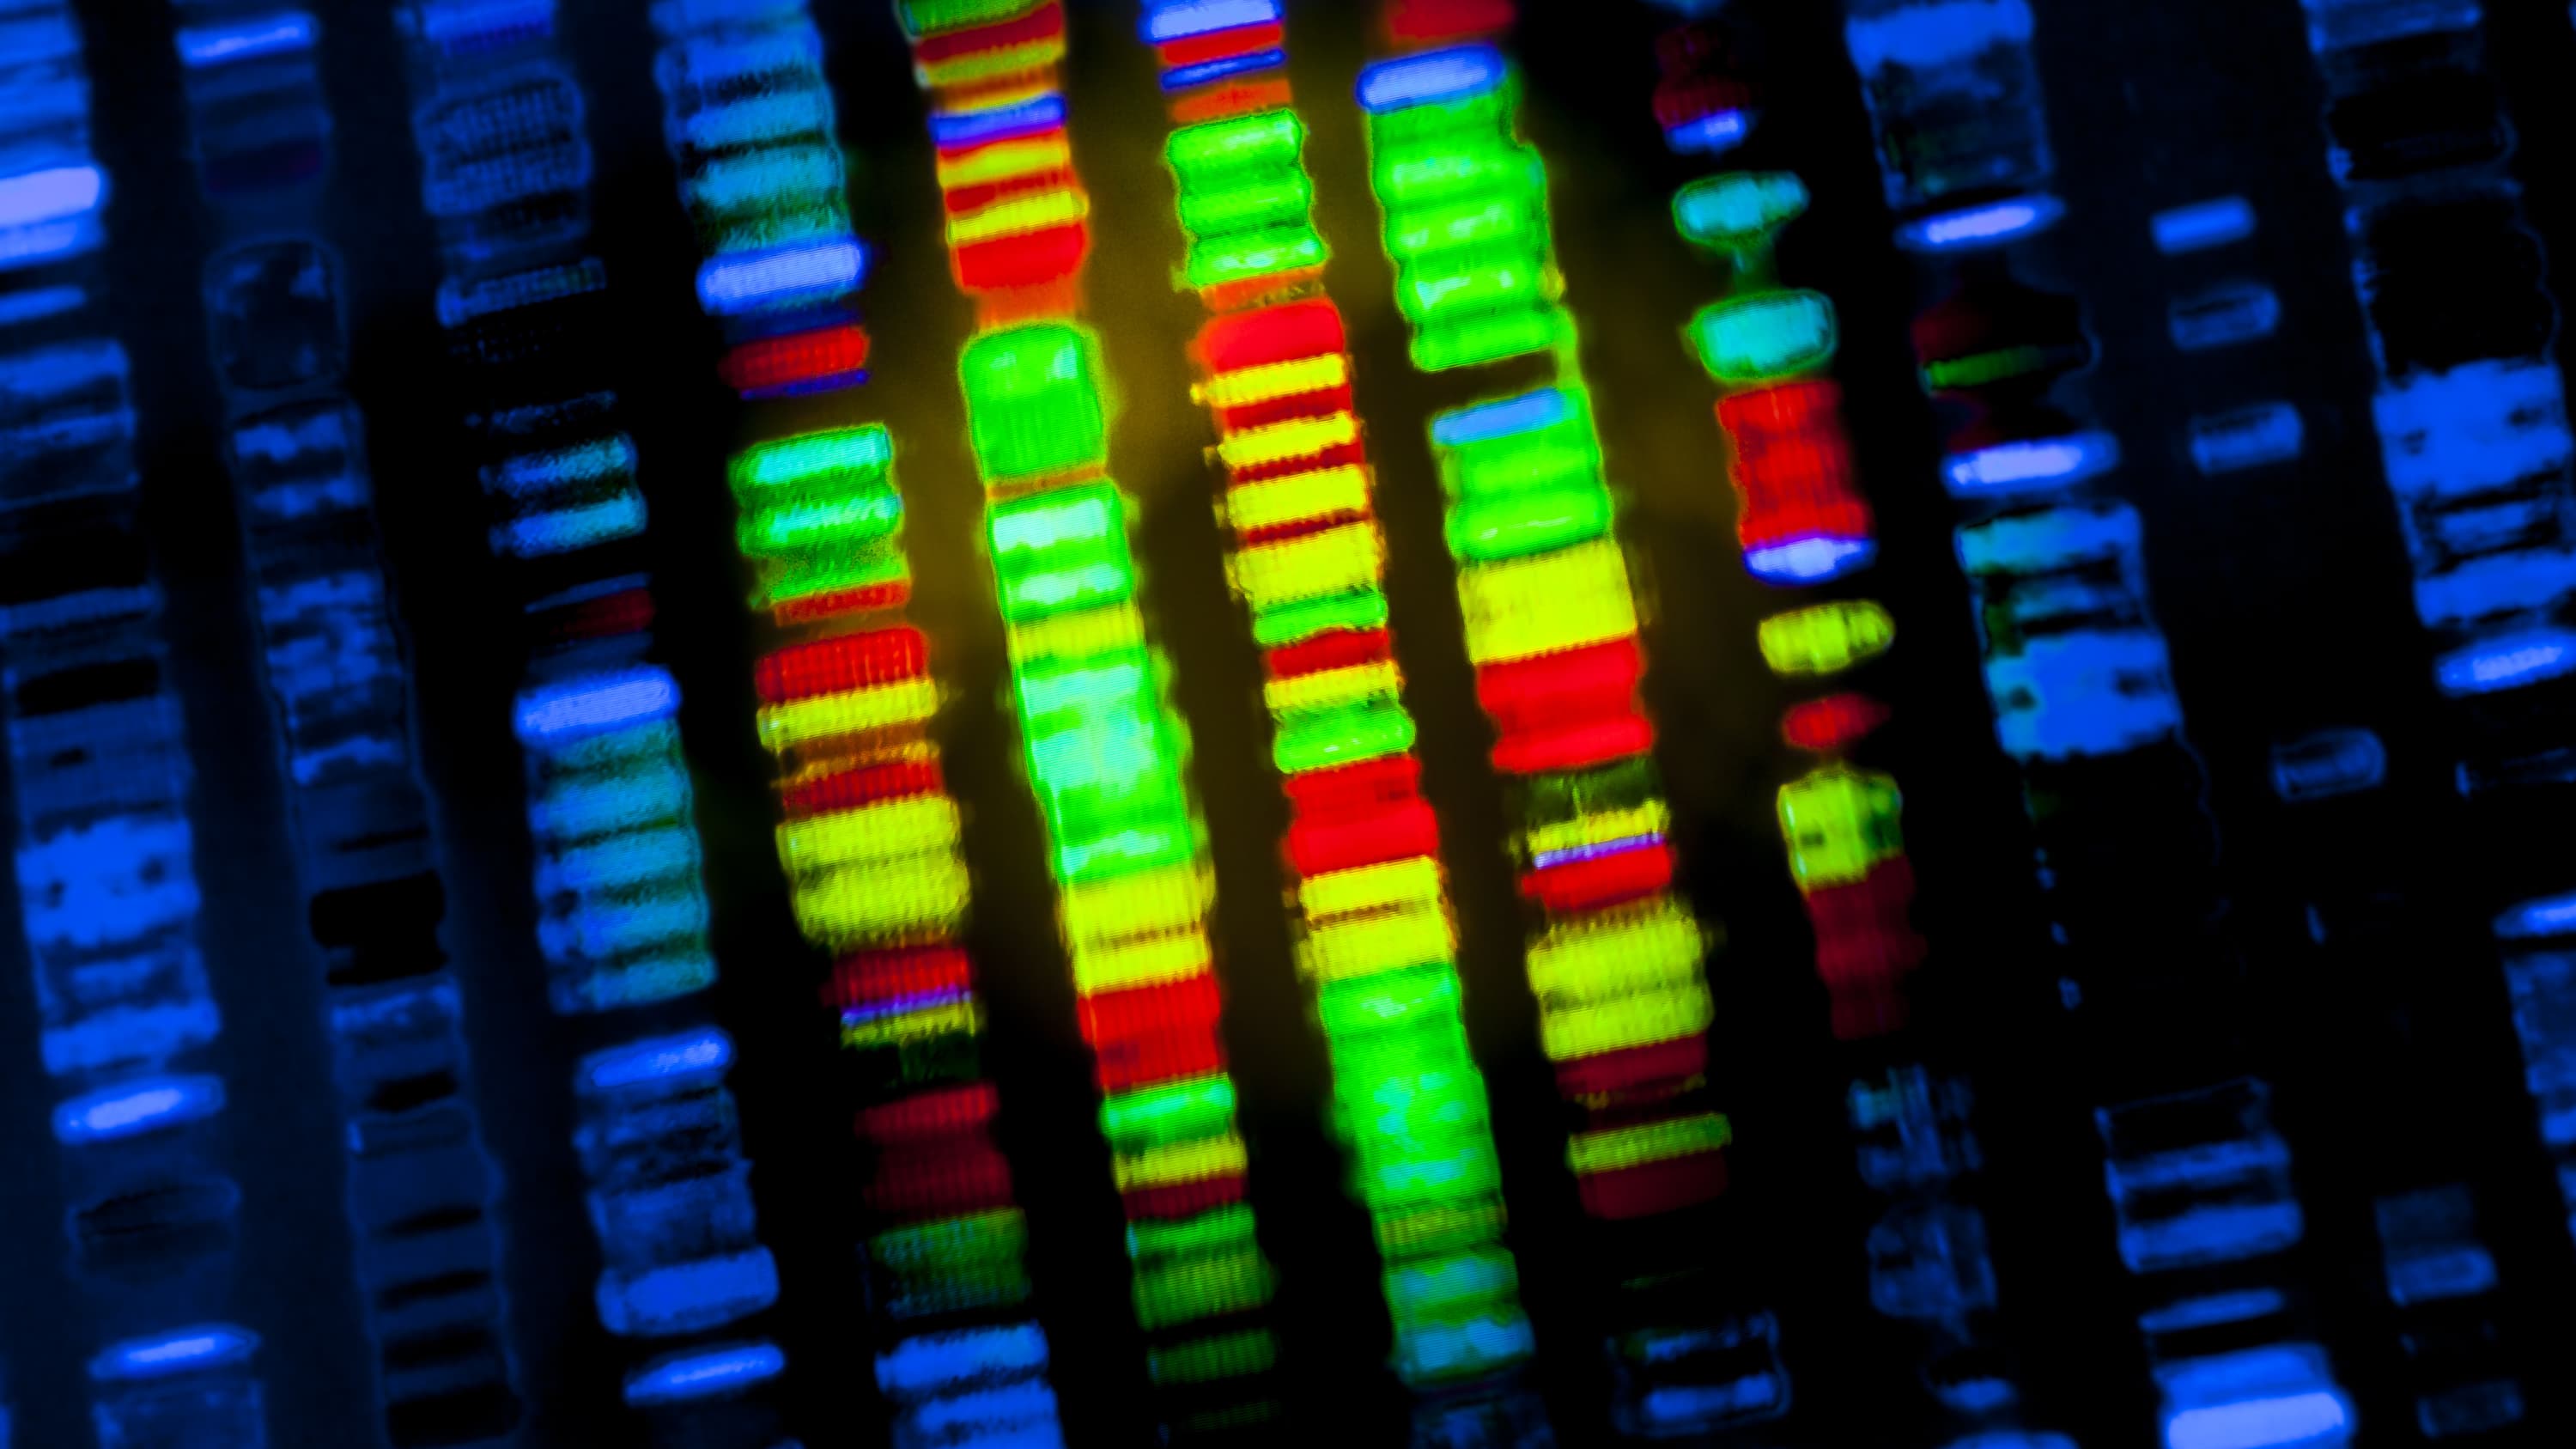 A colorful sequence of DNA shows up on a dark background